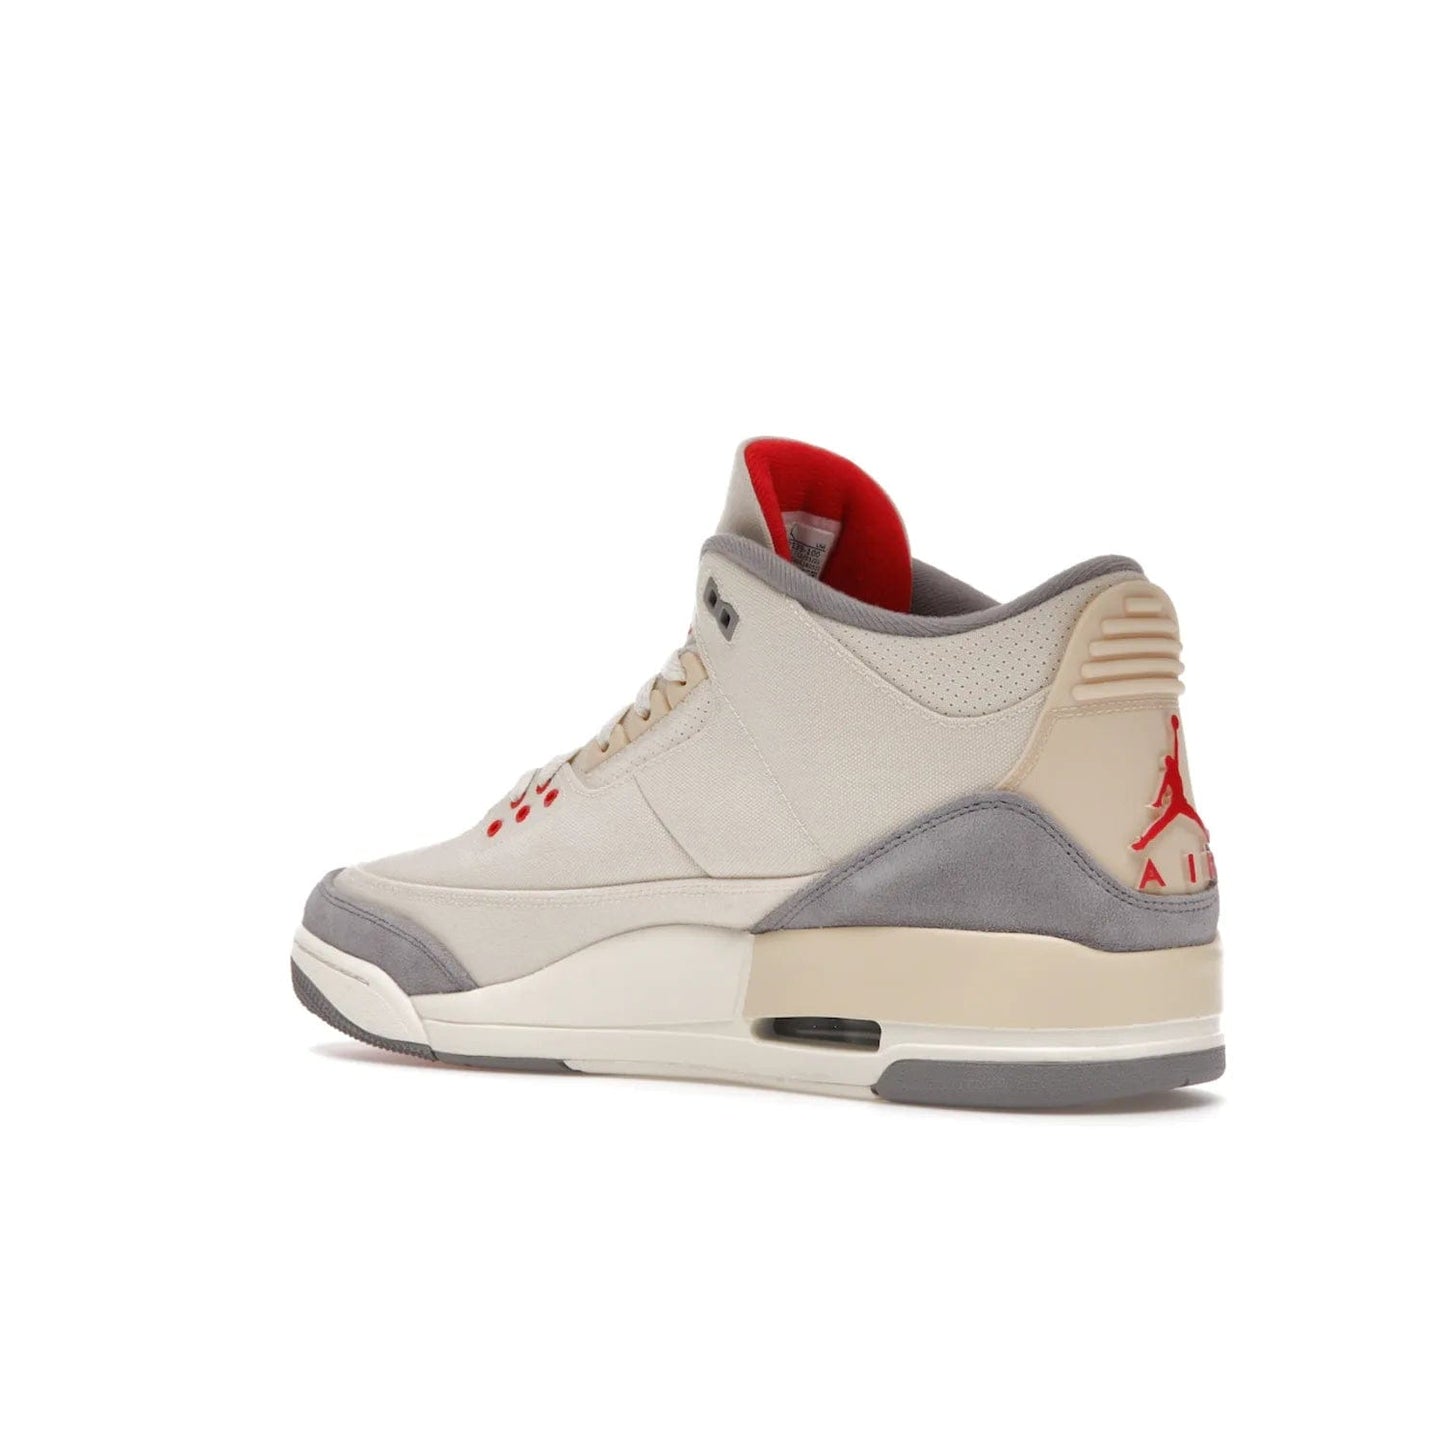 Jordan 3 Retro Muslin - Image 23 - Only at www.BallersClubKickz.com - Eye-catching Air Jordan 3 Retro Muslin in a neutral palette of grey, cream, and red. Featuring canvas upper, suede overlays and white/grey Air Max sole. Available in March 2022.